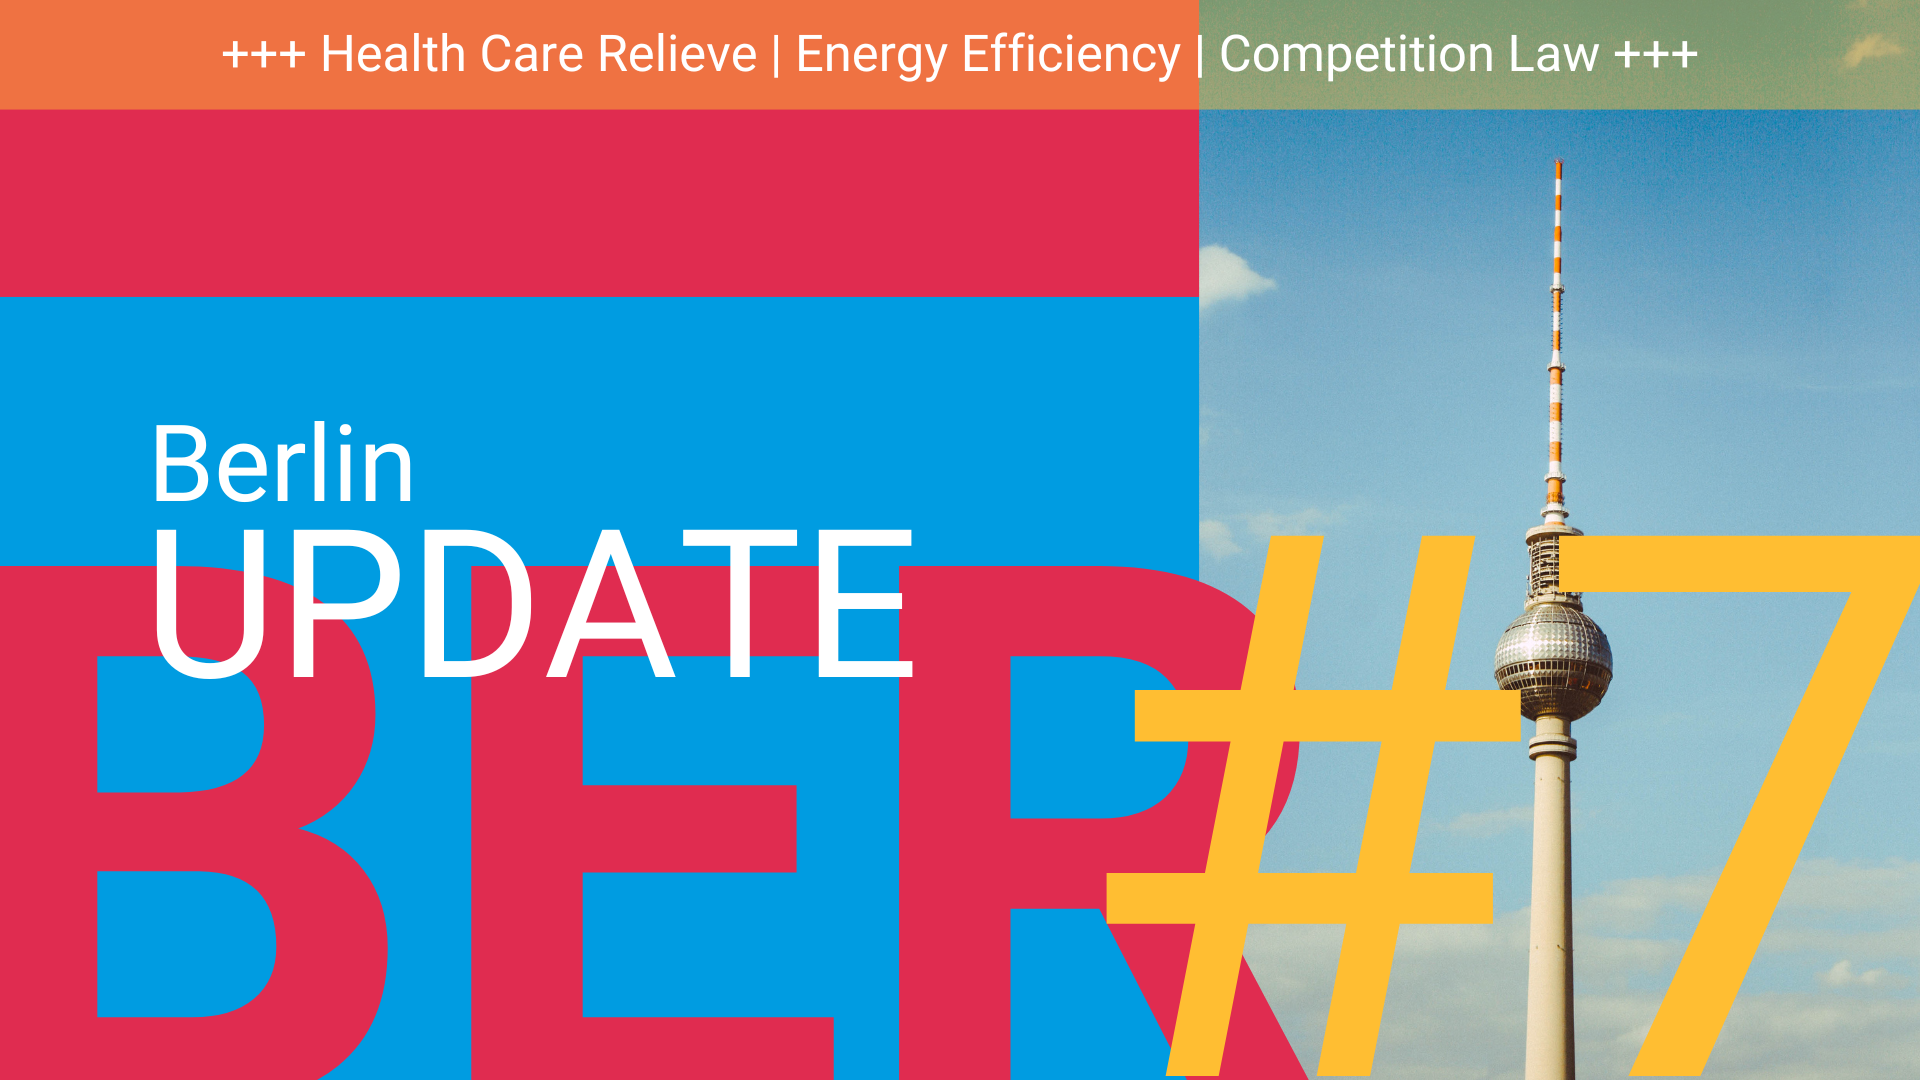 Update from Berlin # 7 | Health Care Relief, Energy Efficiency, Competition Law